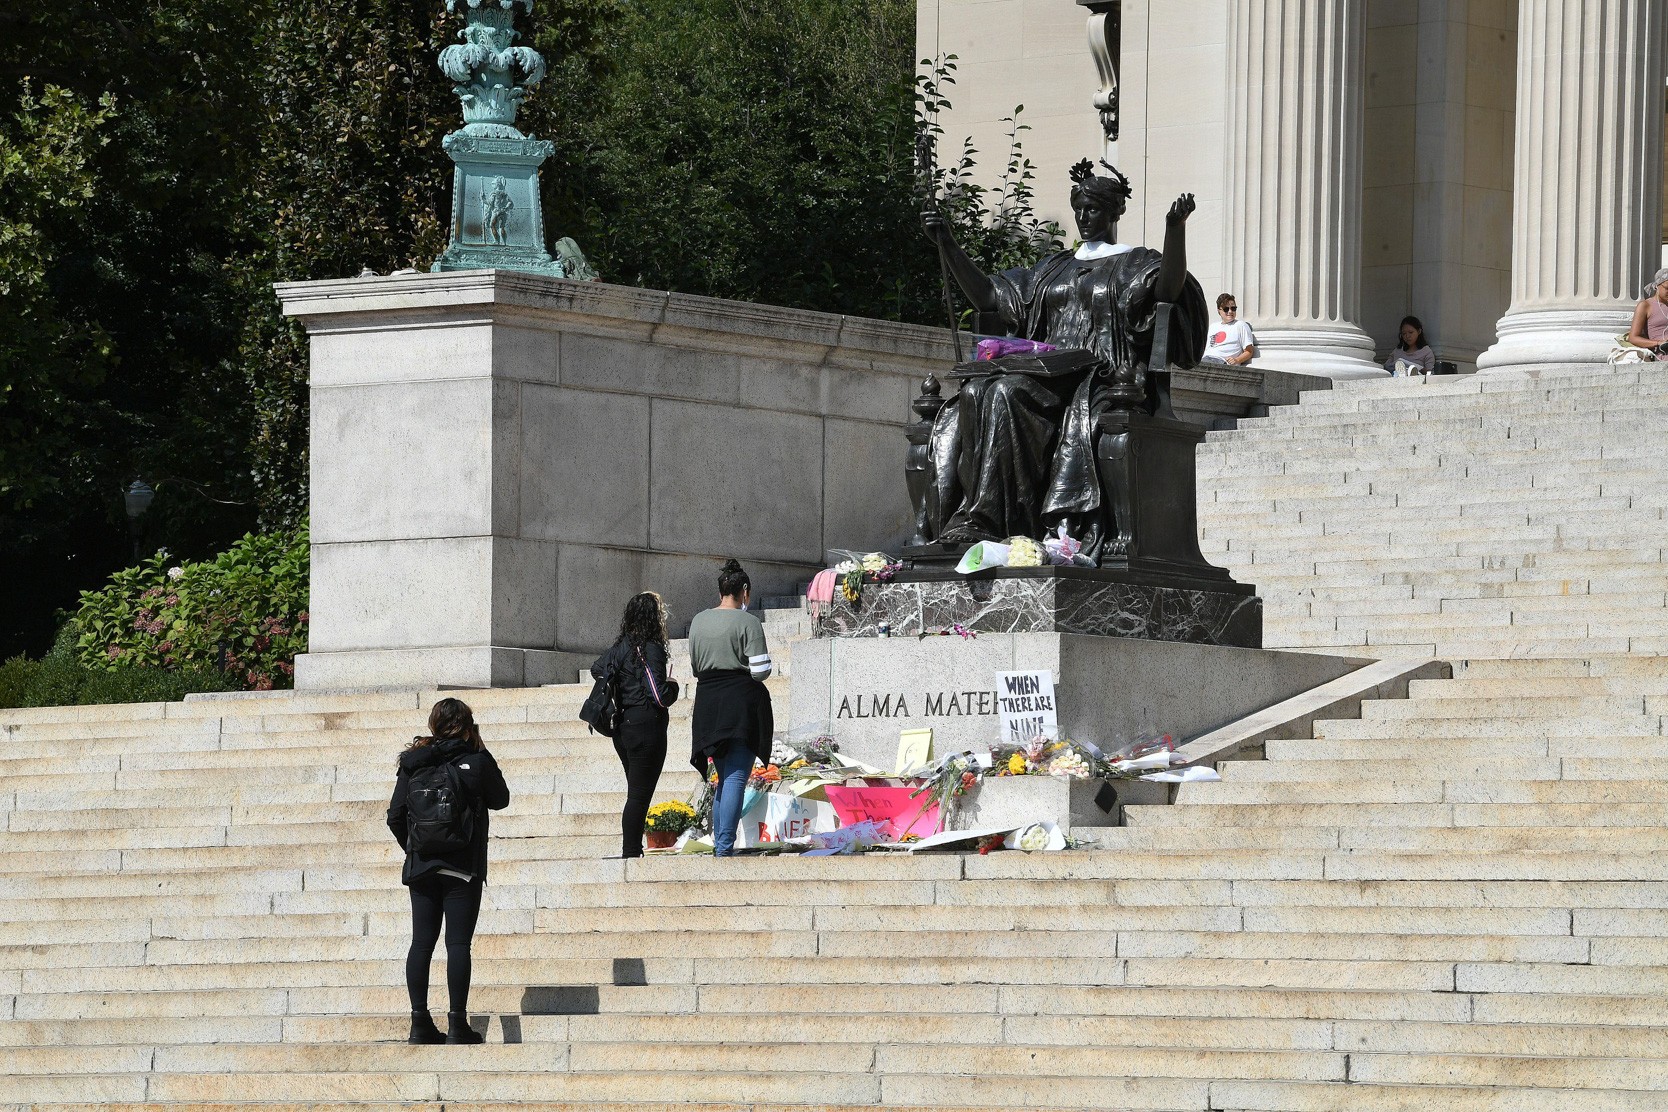 Columbia Community Members leaving flowers at the feet of "Alma Mater" in memory of Supreme Court Justice Ruth Bader Ginsburg